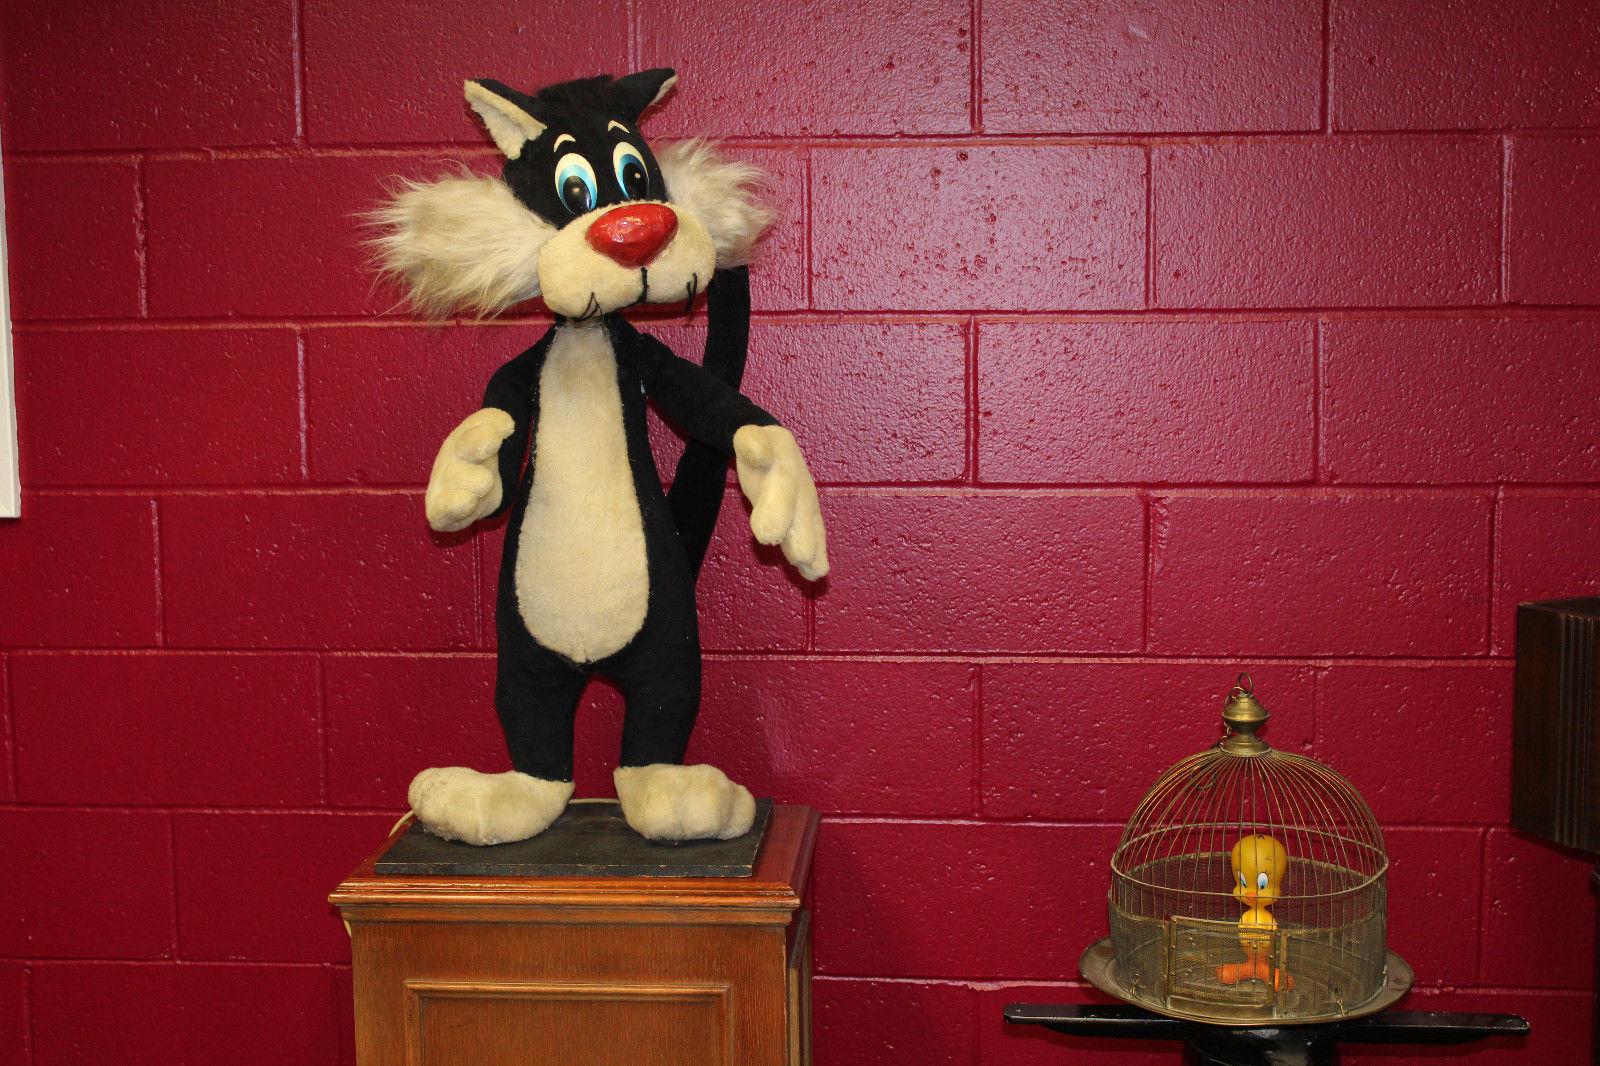 Vintage rare moving plush toy, in good condition. Believed to have been made for a department store window display. Sylvester is mechanical and moves his head side to side as well as his hands up and down. This piece came out of a high end